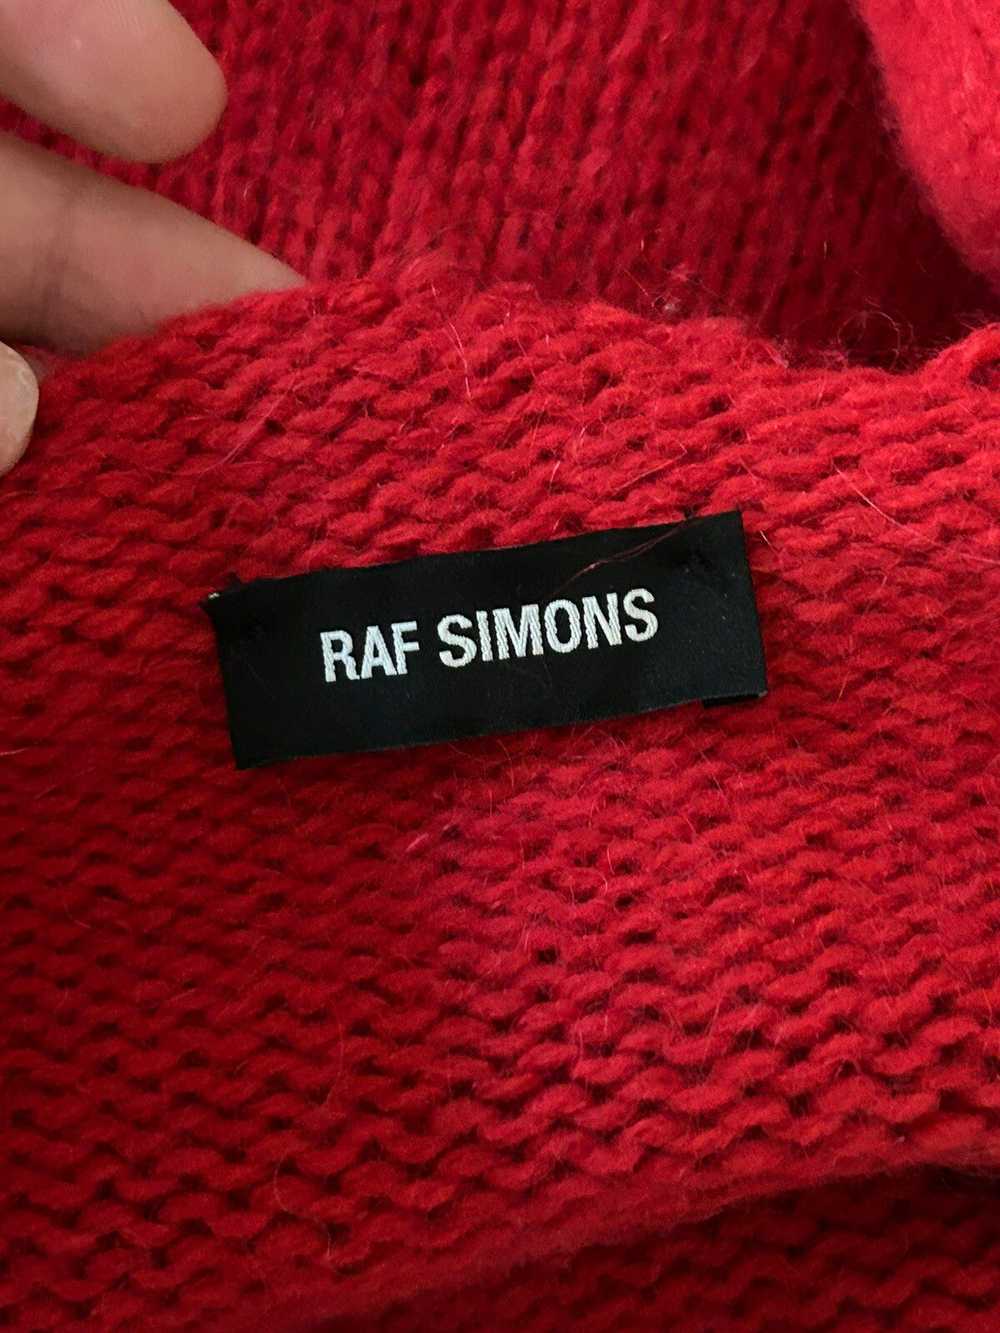 Raf Simons Abstract Printed Cut Off Sweater - image 4